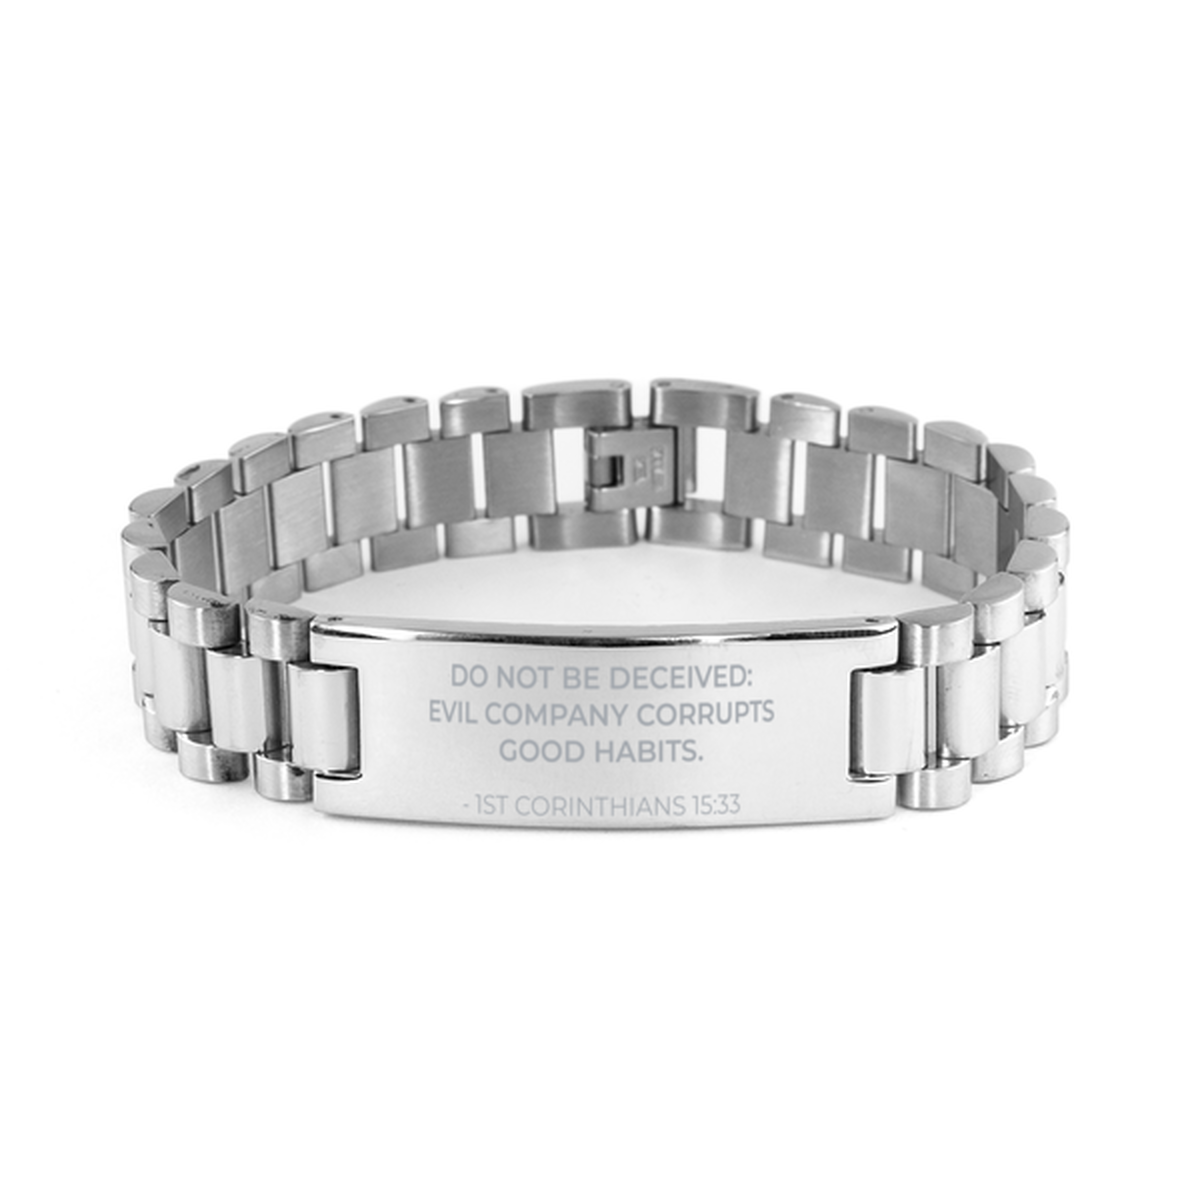 Christian Ladder Stainless Steel Bracelet, 1St Corinthians 15:33 Do Not Be Deceived: Evil Company Corrupts Good, Motivational Bible Verse Gifts For Men Women